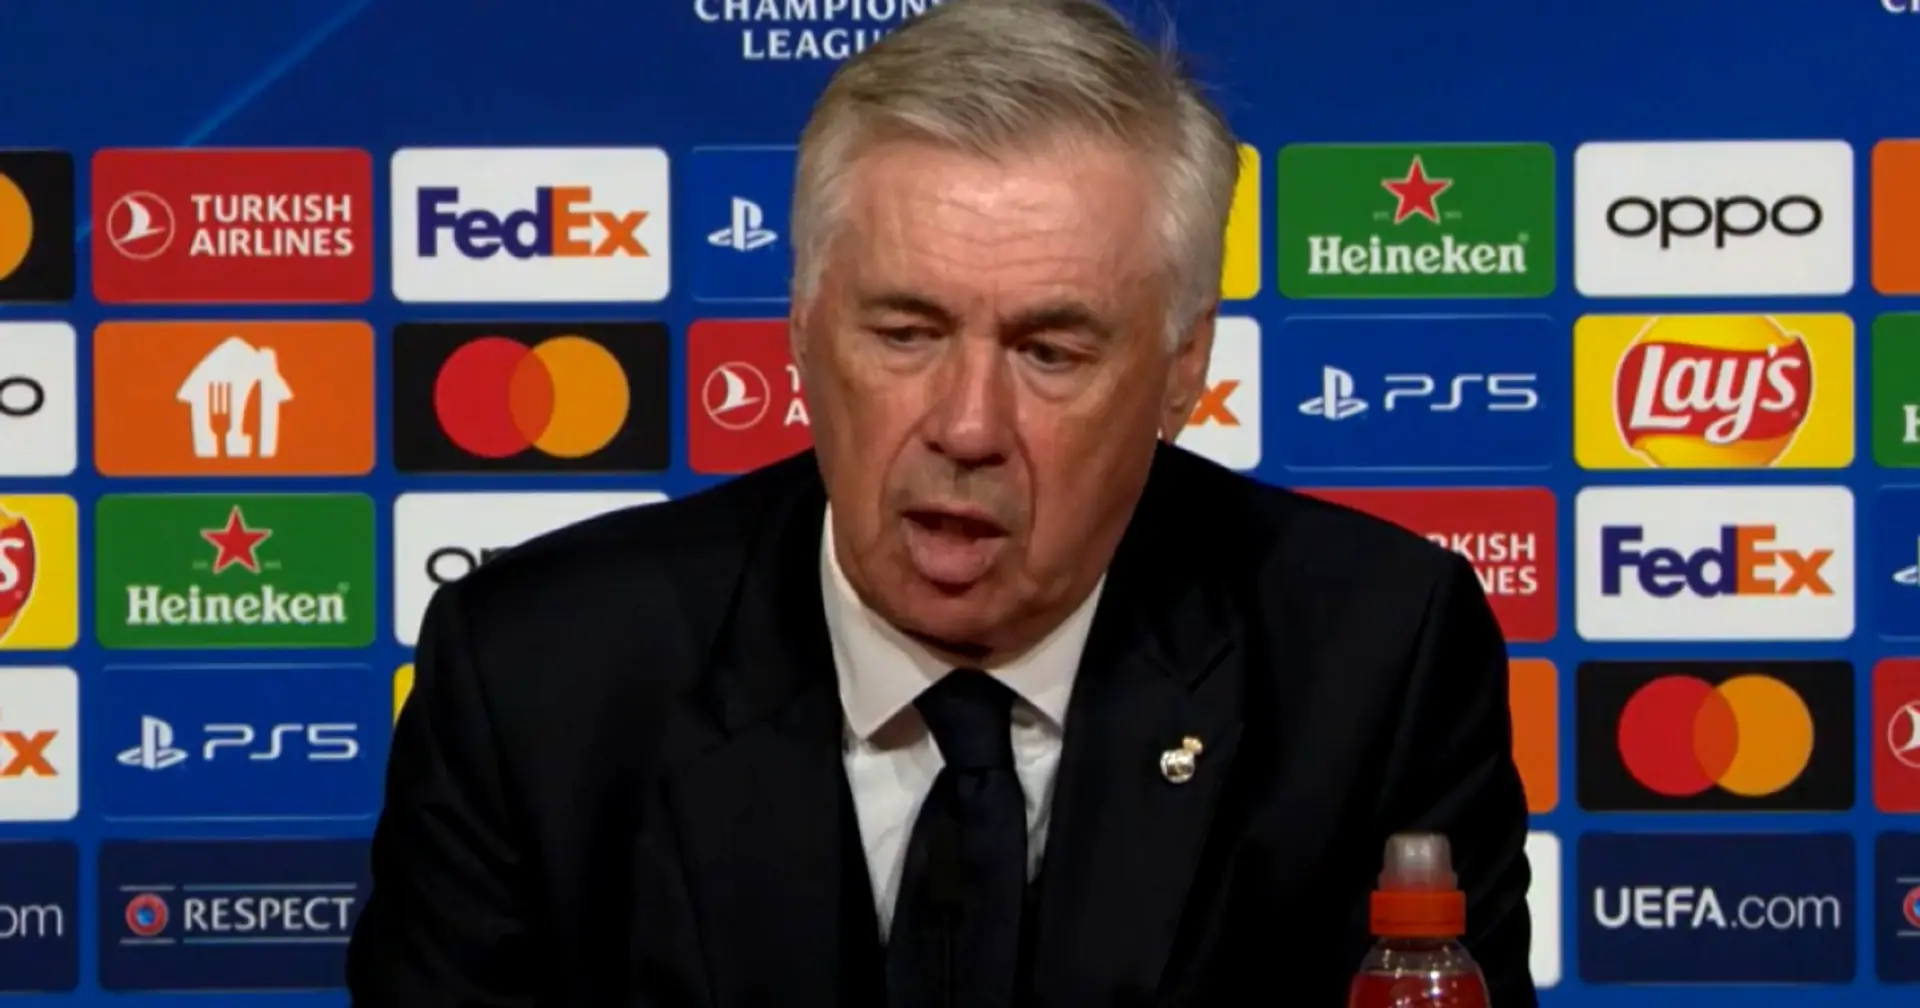 Ancelotti rates Real Madrid's chances of defeating Bayern in semi-final second leg